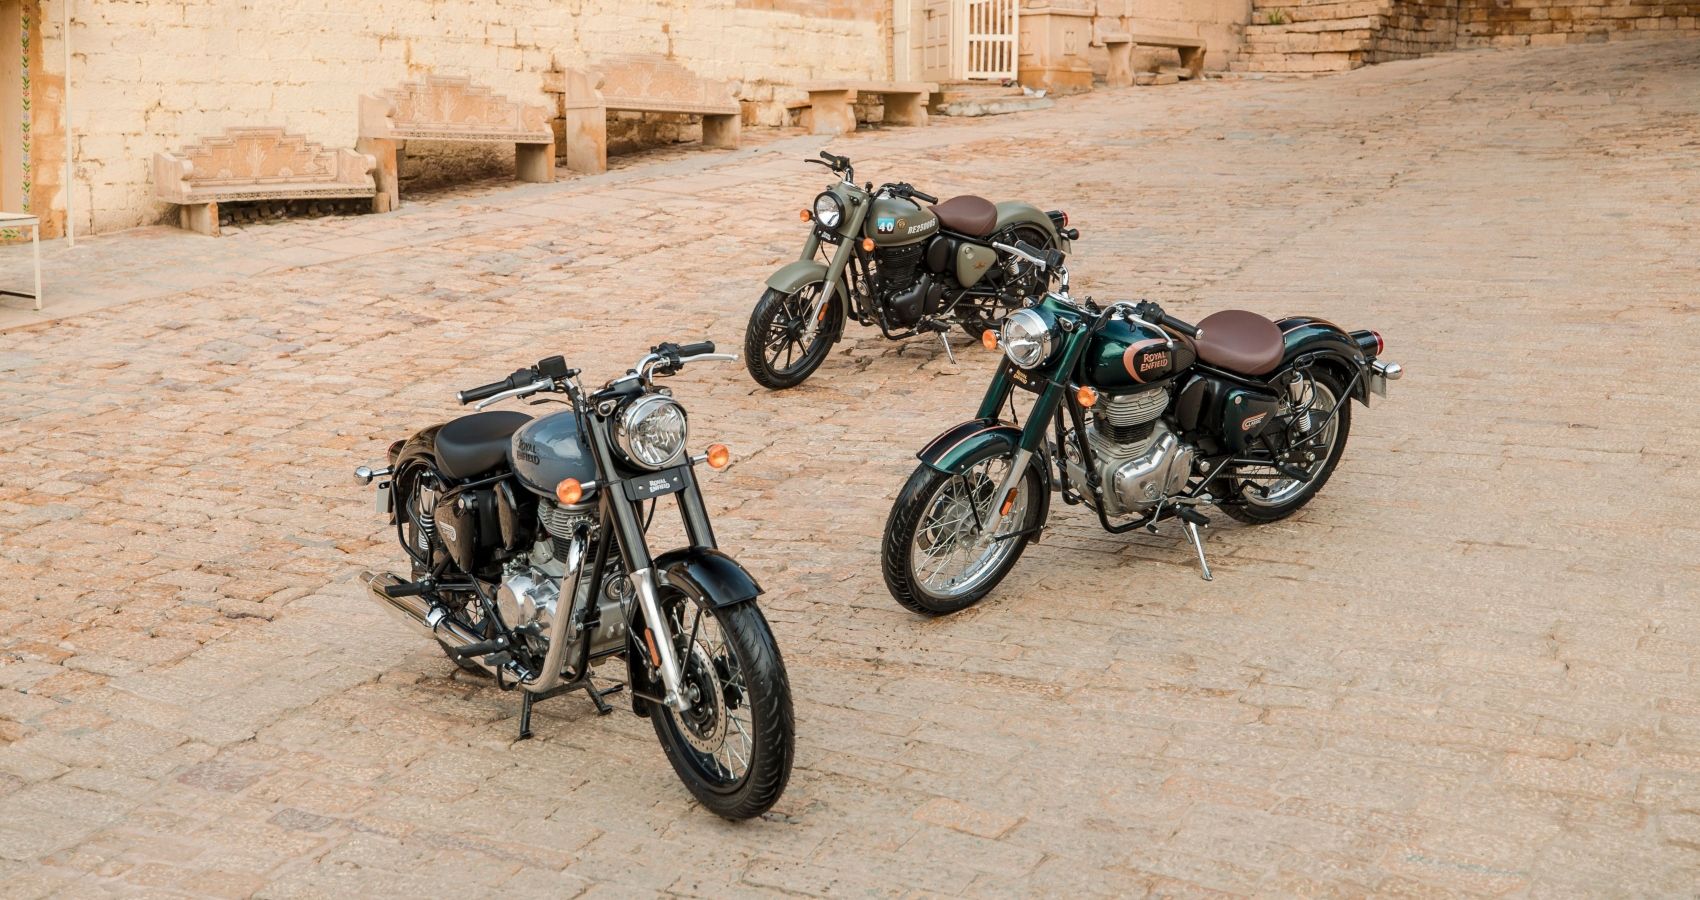 Different versions of the Indian-spec Royal Enfield Classic 350 motorcycle